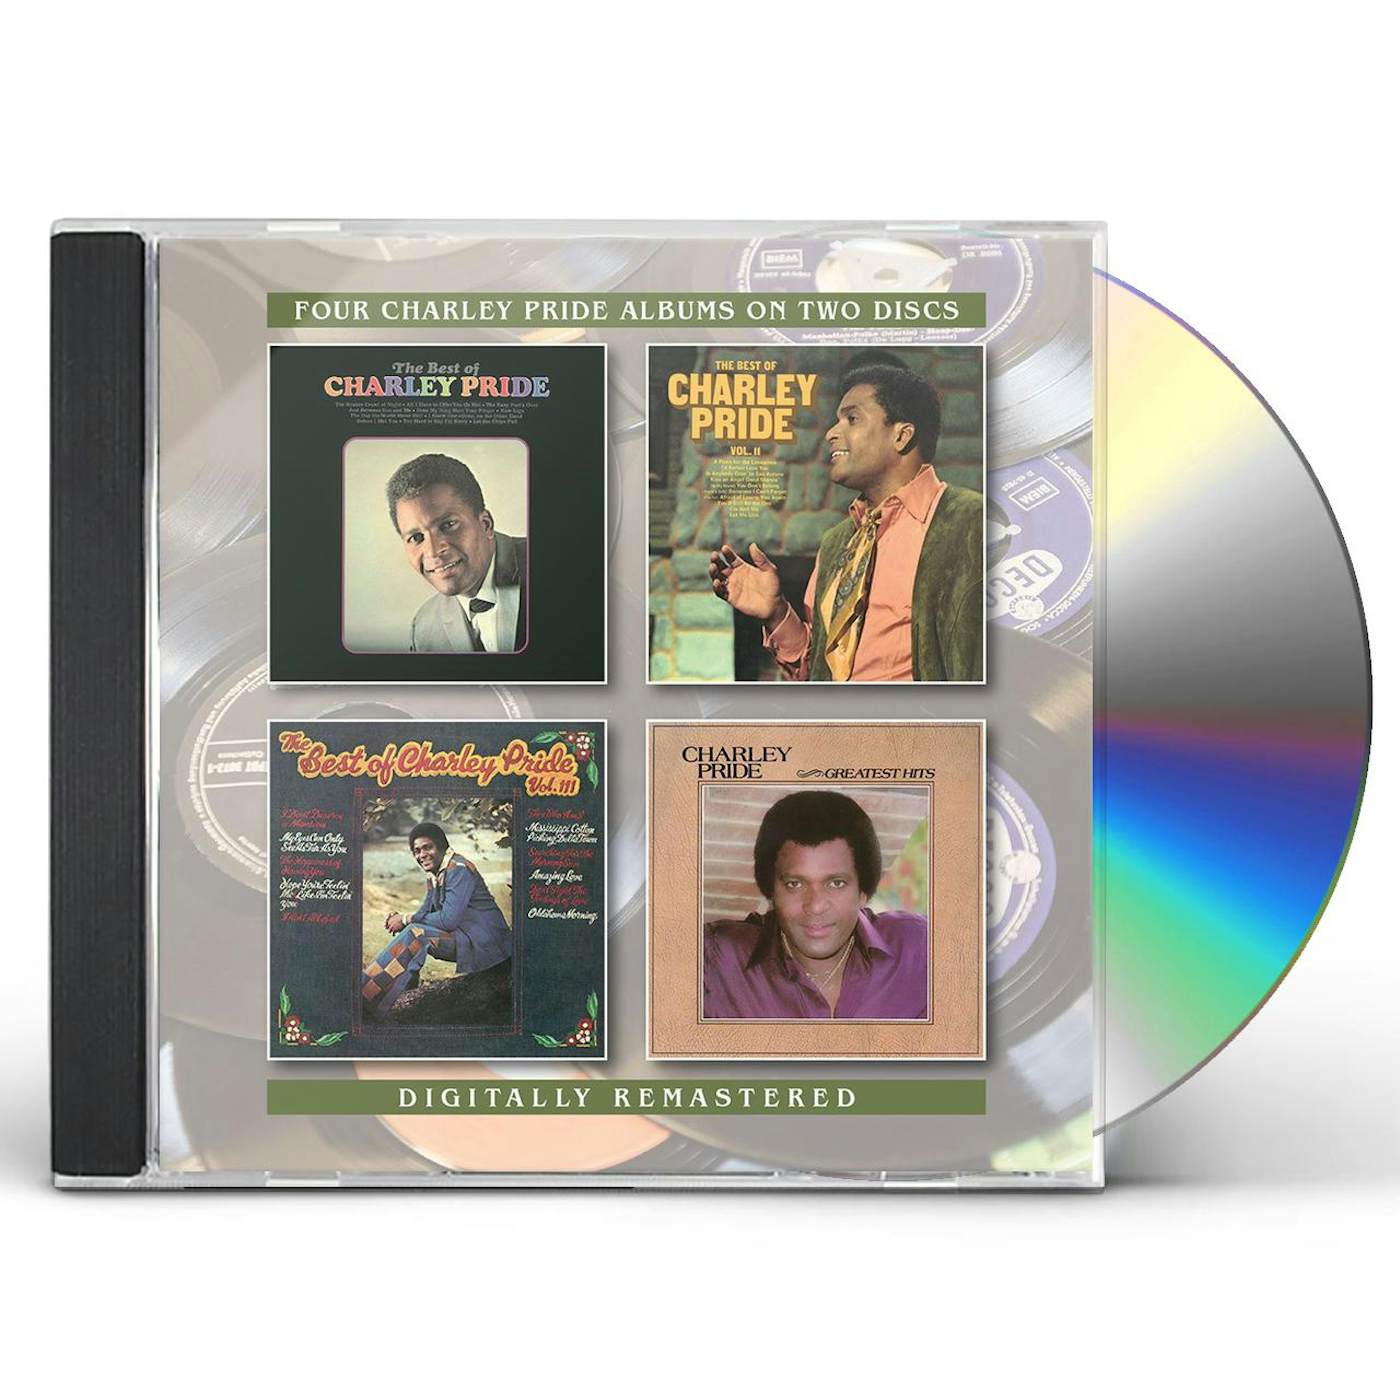 Charley Pride BEST OF / BEST OF 2 / BEST OF 3 / GREATEST HITS CD